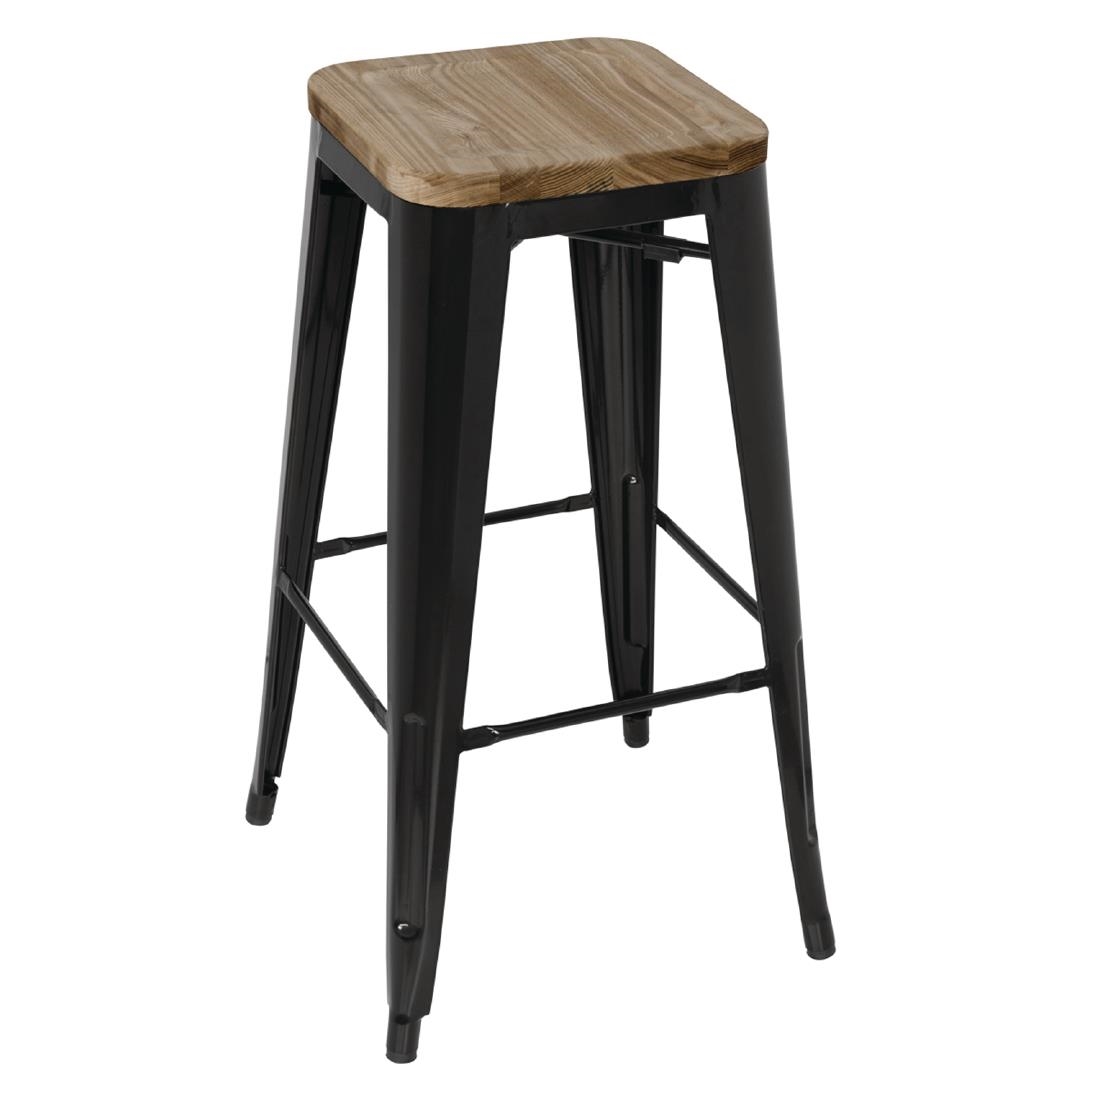 Pack of 4 Bolero Cantina Low Stools in Metallic Grey with Wooden Seat Pad 